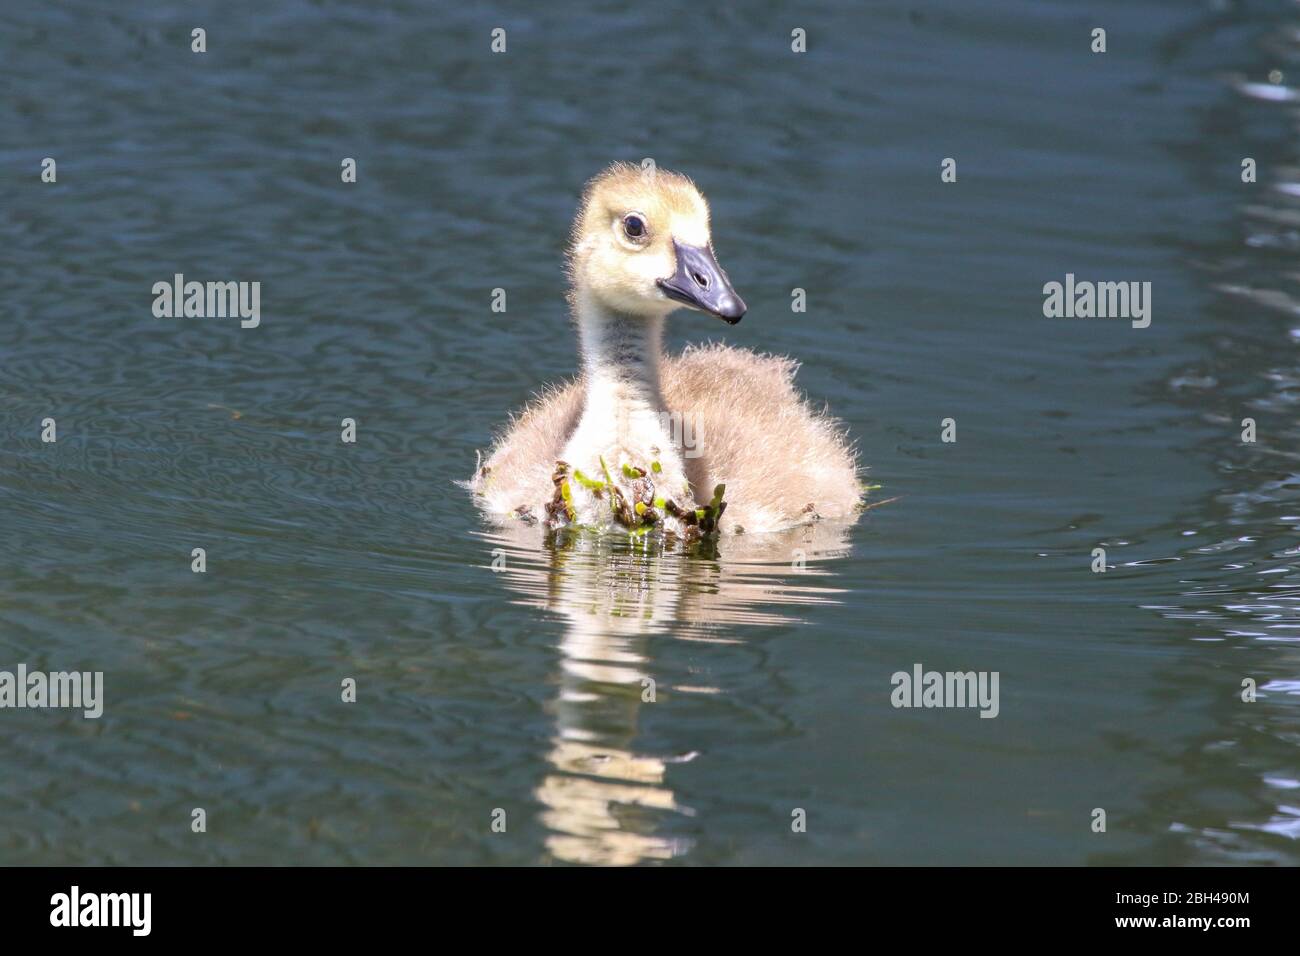 A Canada Goose Chick Swims on His Own in a Pond in Jacksonville Beach, Florida Stock Photo